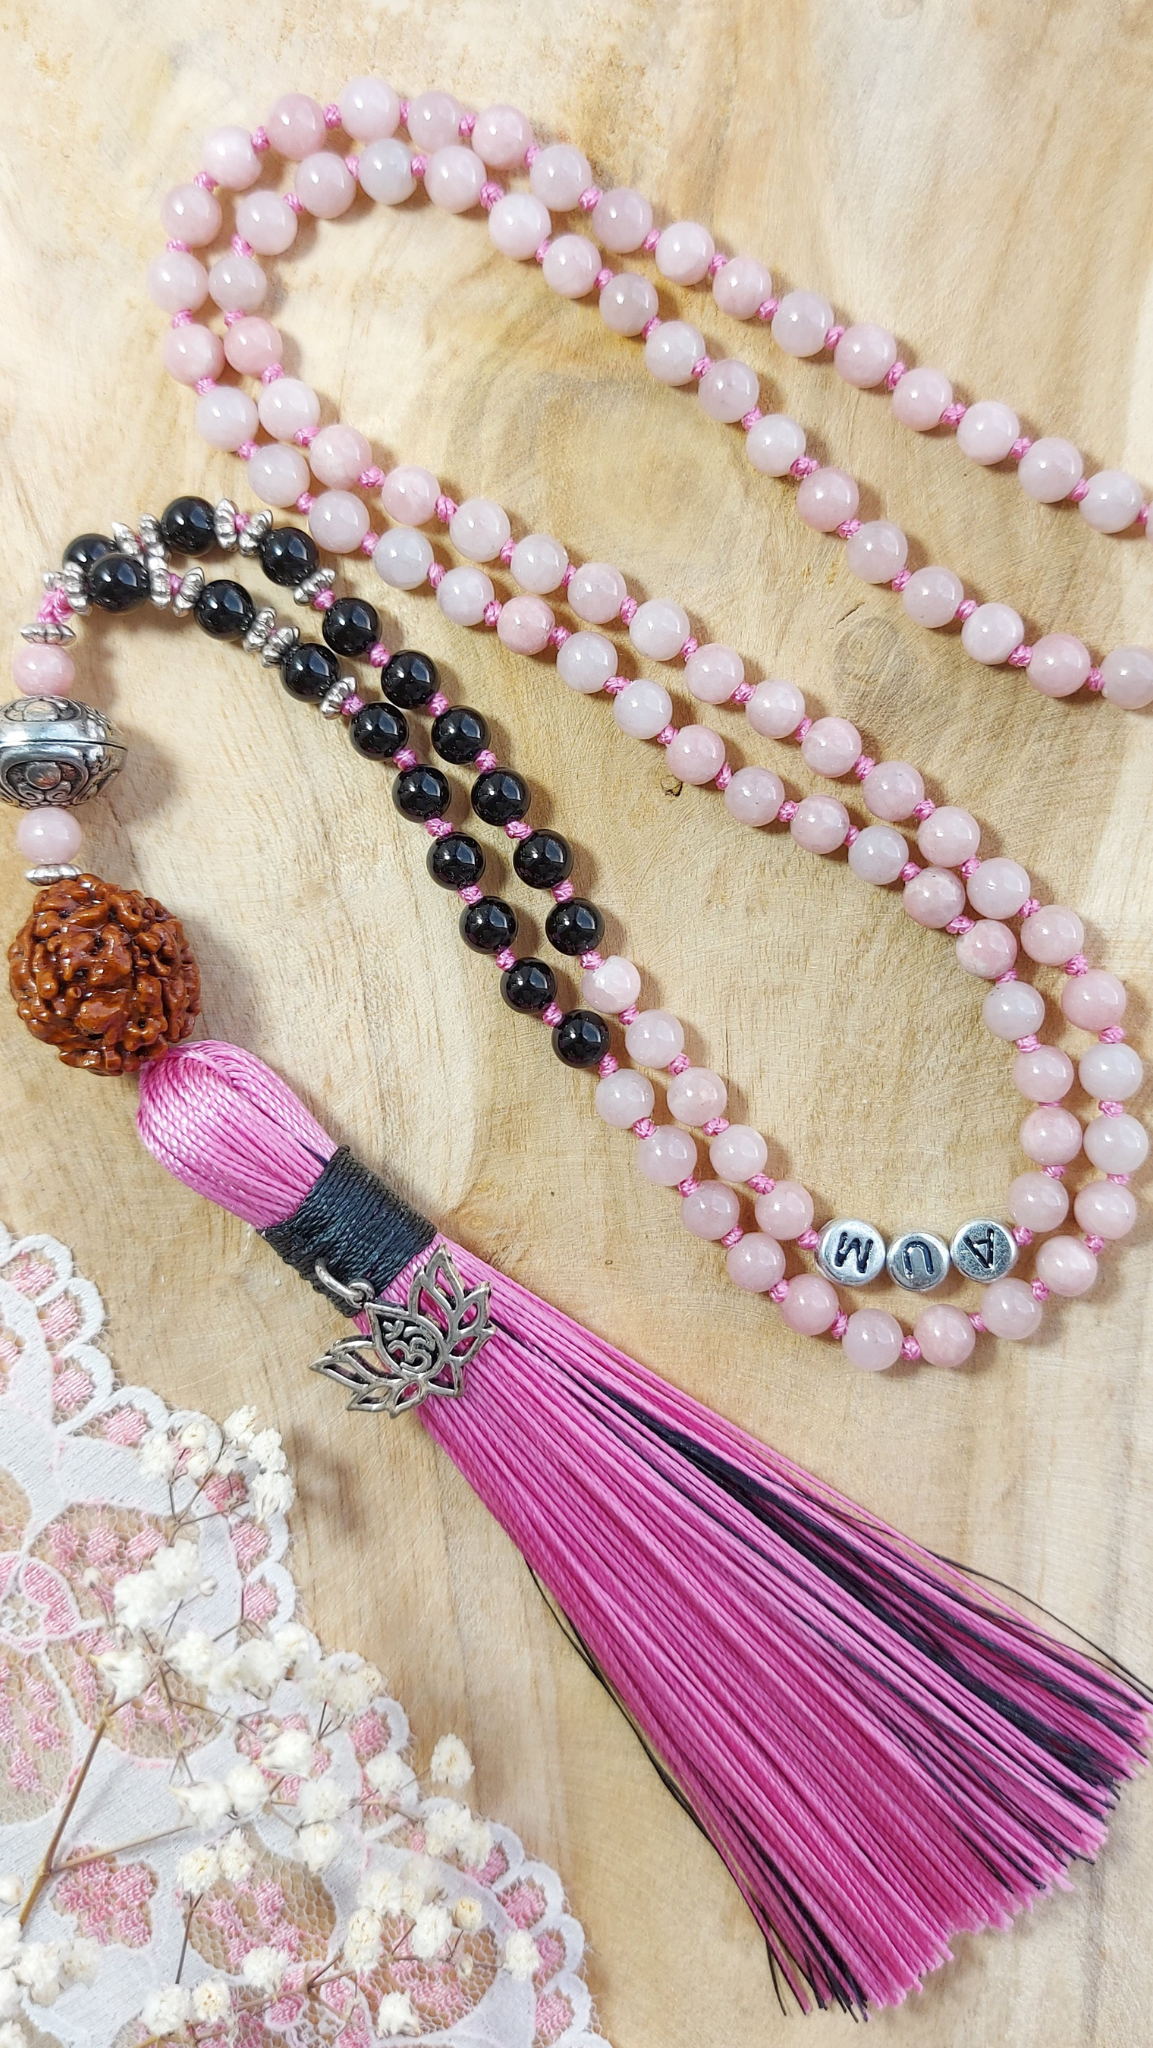 PEACEFUL POWER Mala Meditation Necklace with Pink Agate and Black Onyx